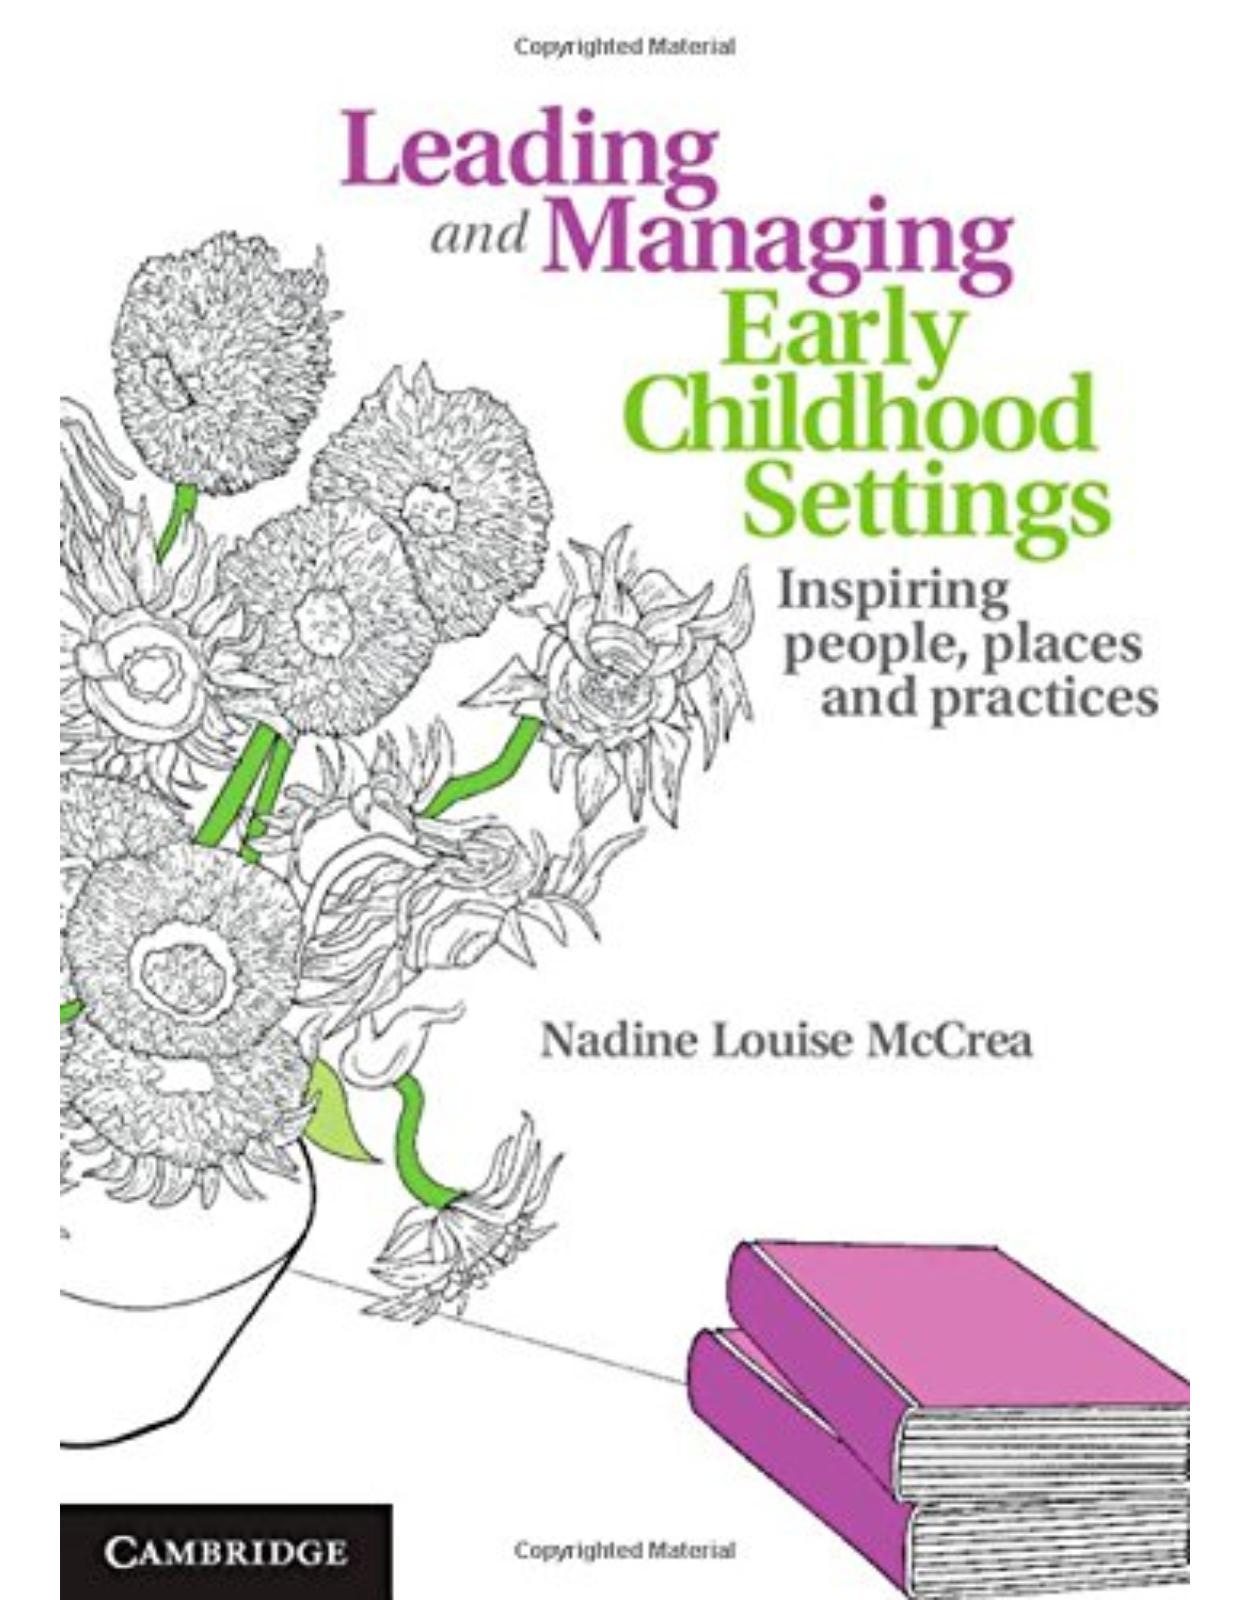 Leading and Managing Early Childhood Settings: Inspiring People, Places and Practices